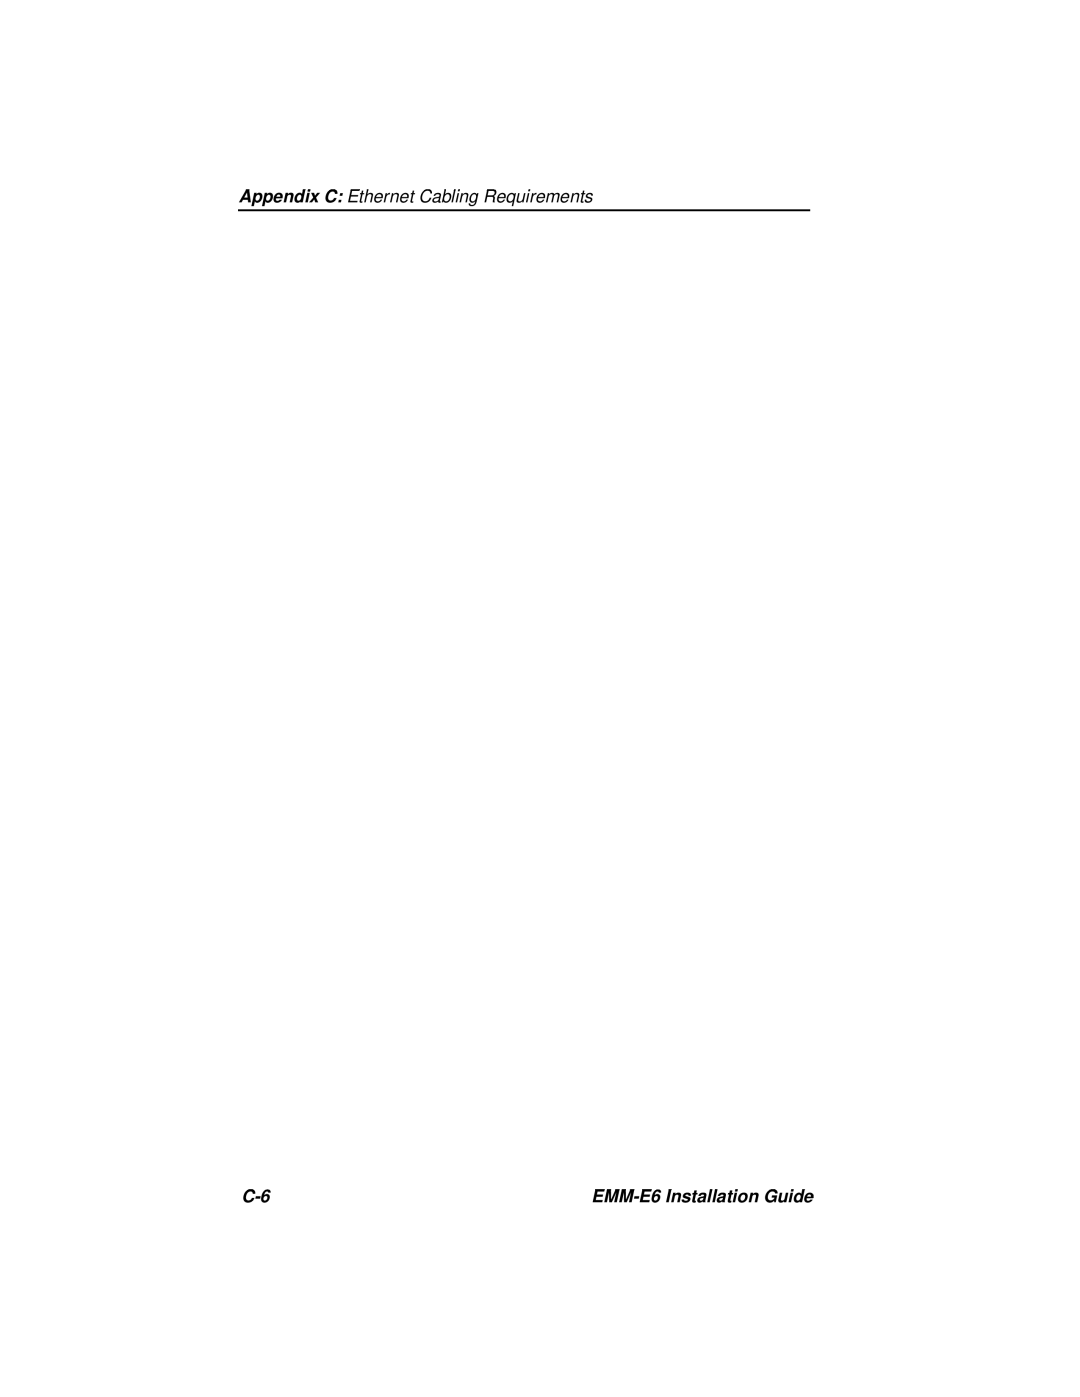 Cabletron Systems manual Appendix C Ethernet Cabling Requirements, EMM-E6 Installation Guide 